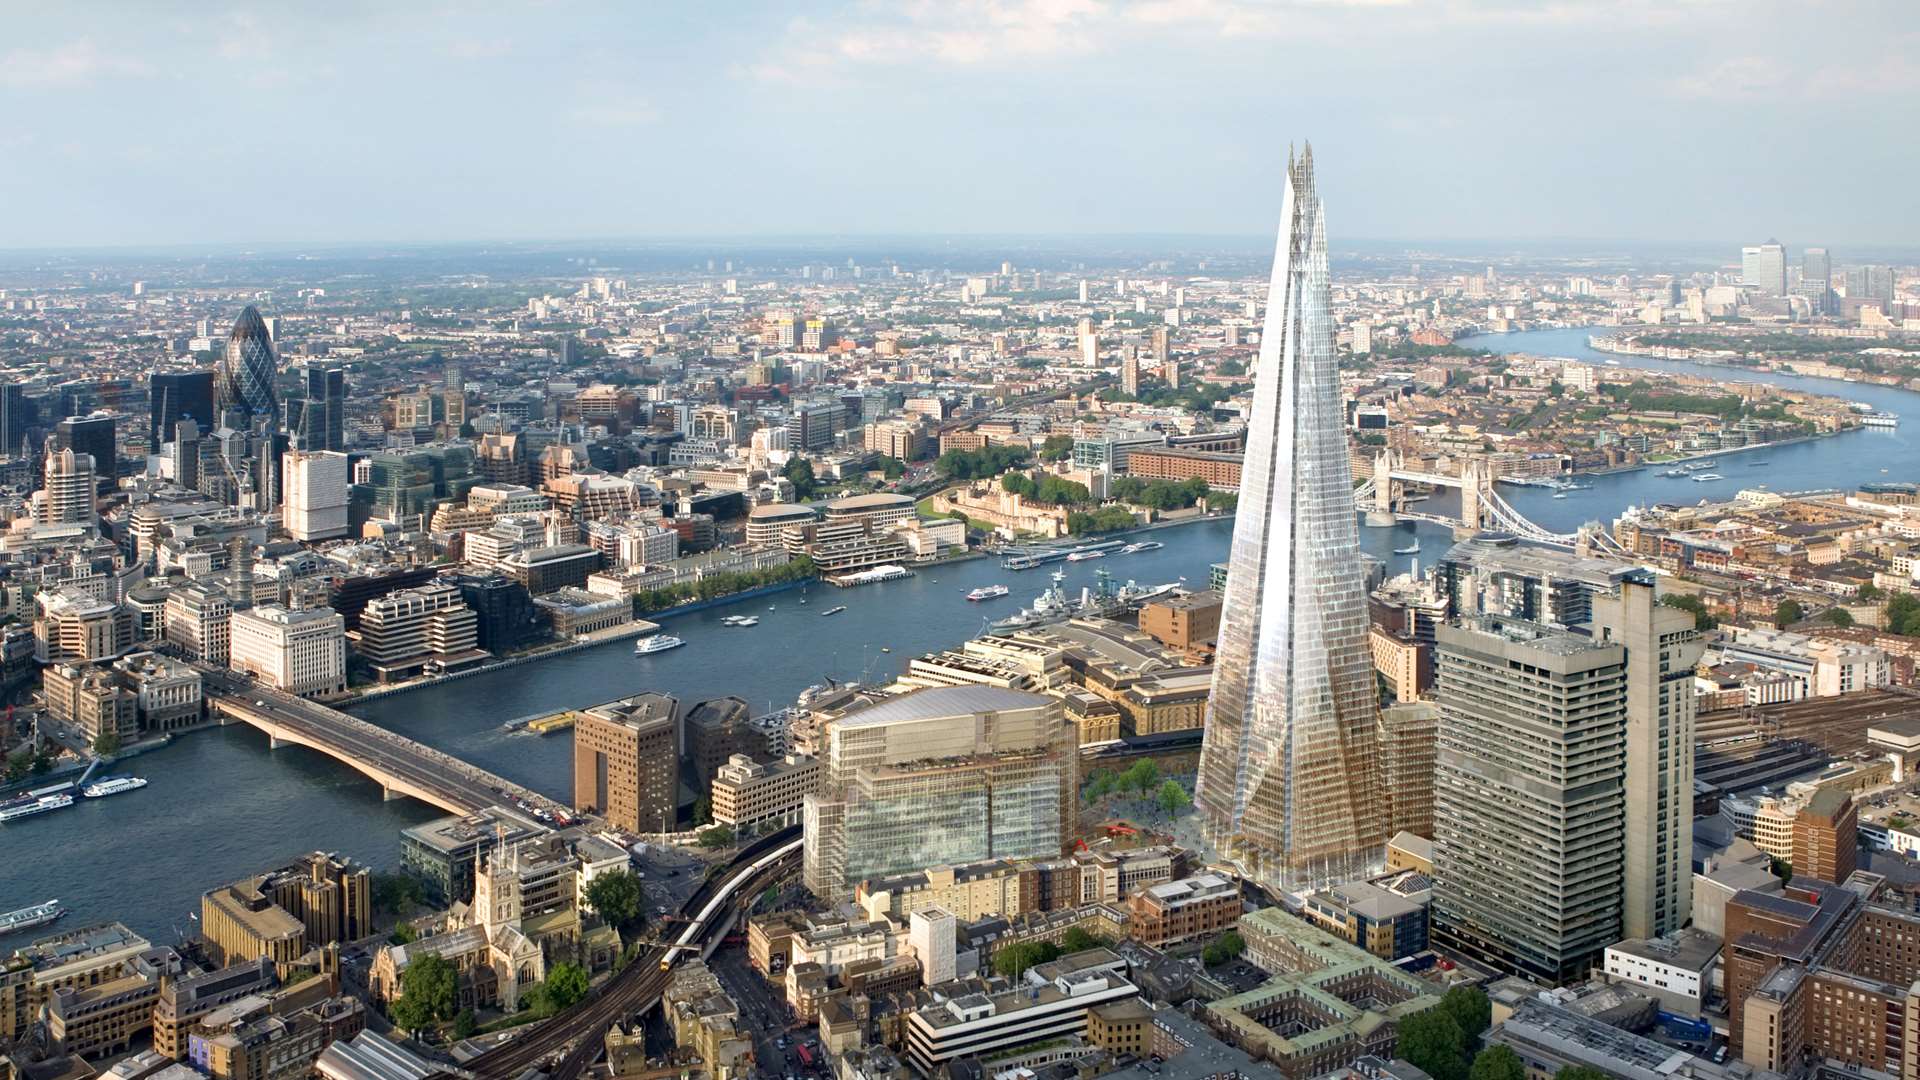 The Shard is dubbed Europe's tallest building